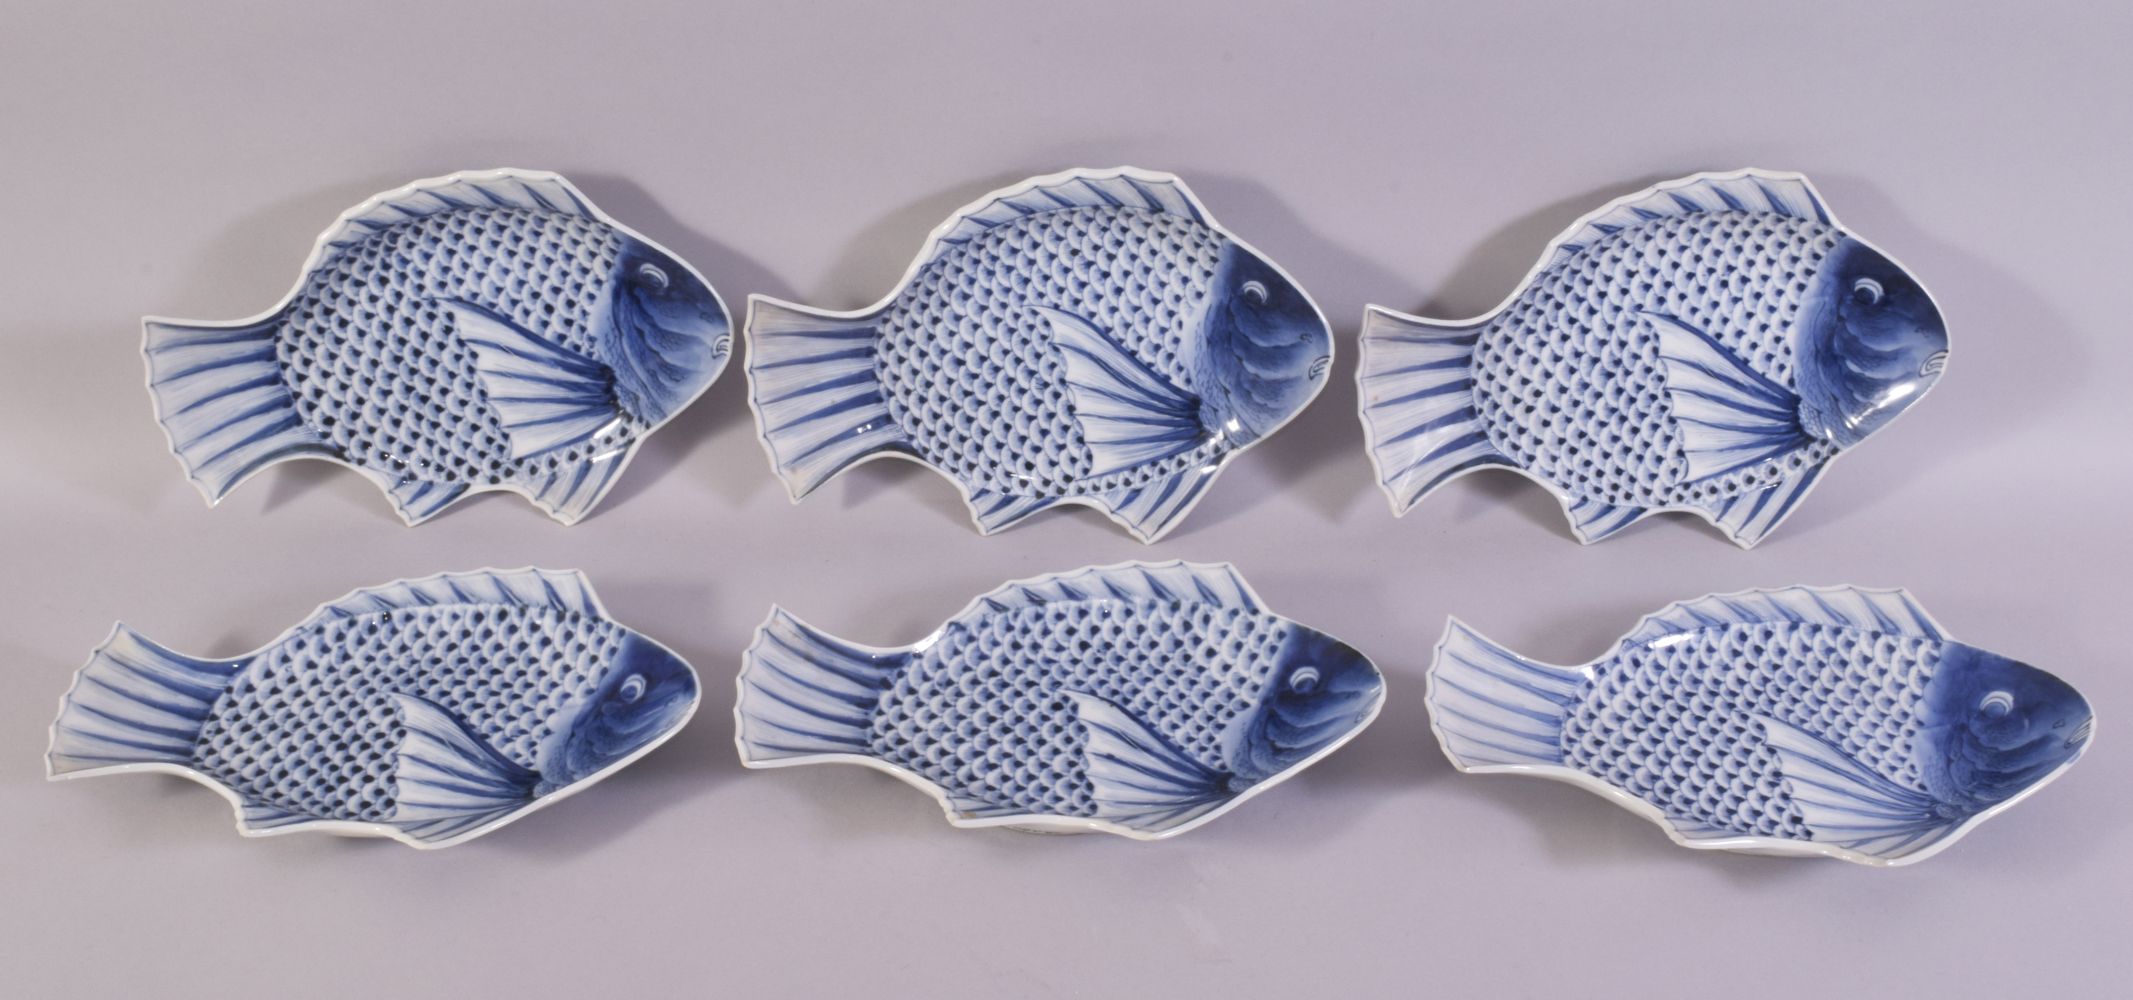 SIX CHINESE BLUE AND WHITE PORCELAIN FISH FORM DISHES, the dishes painted as fish, each dish with